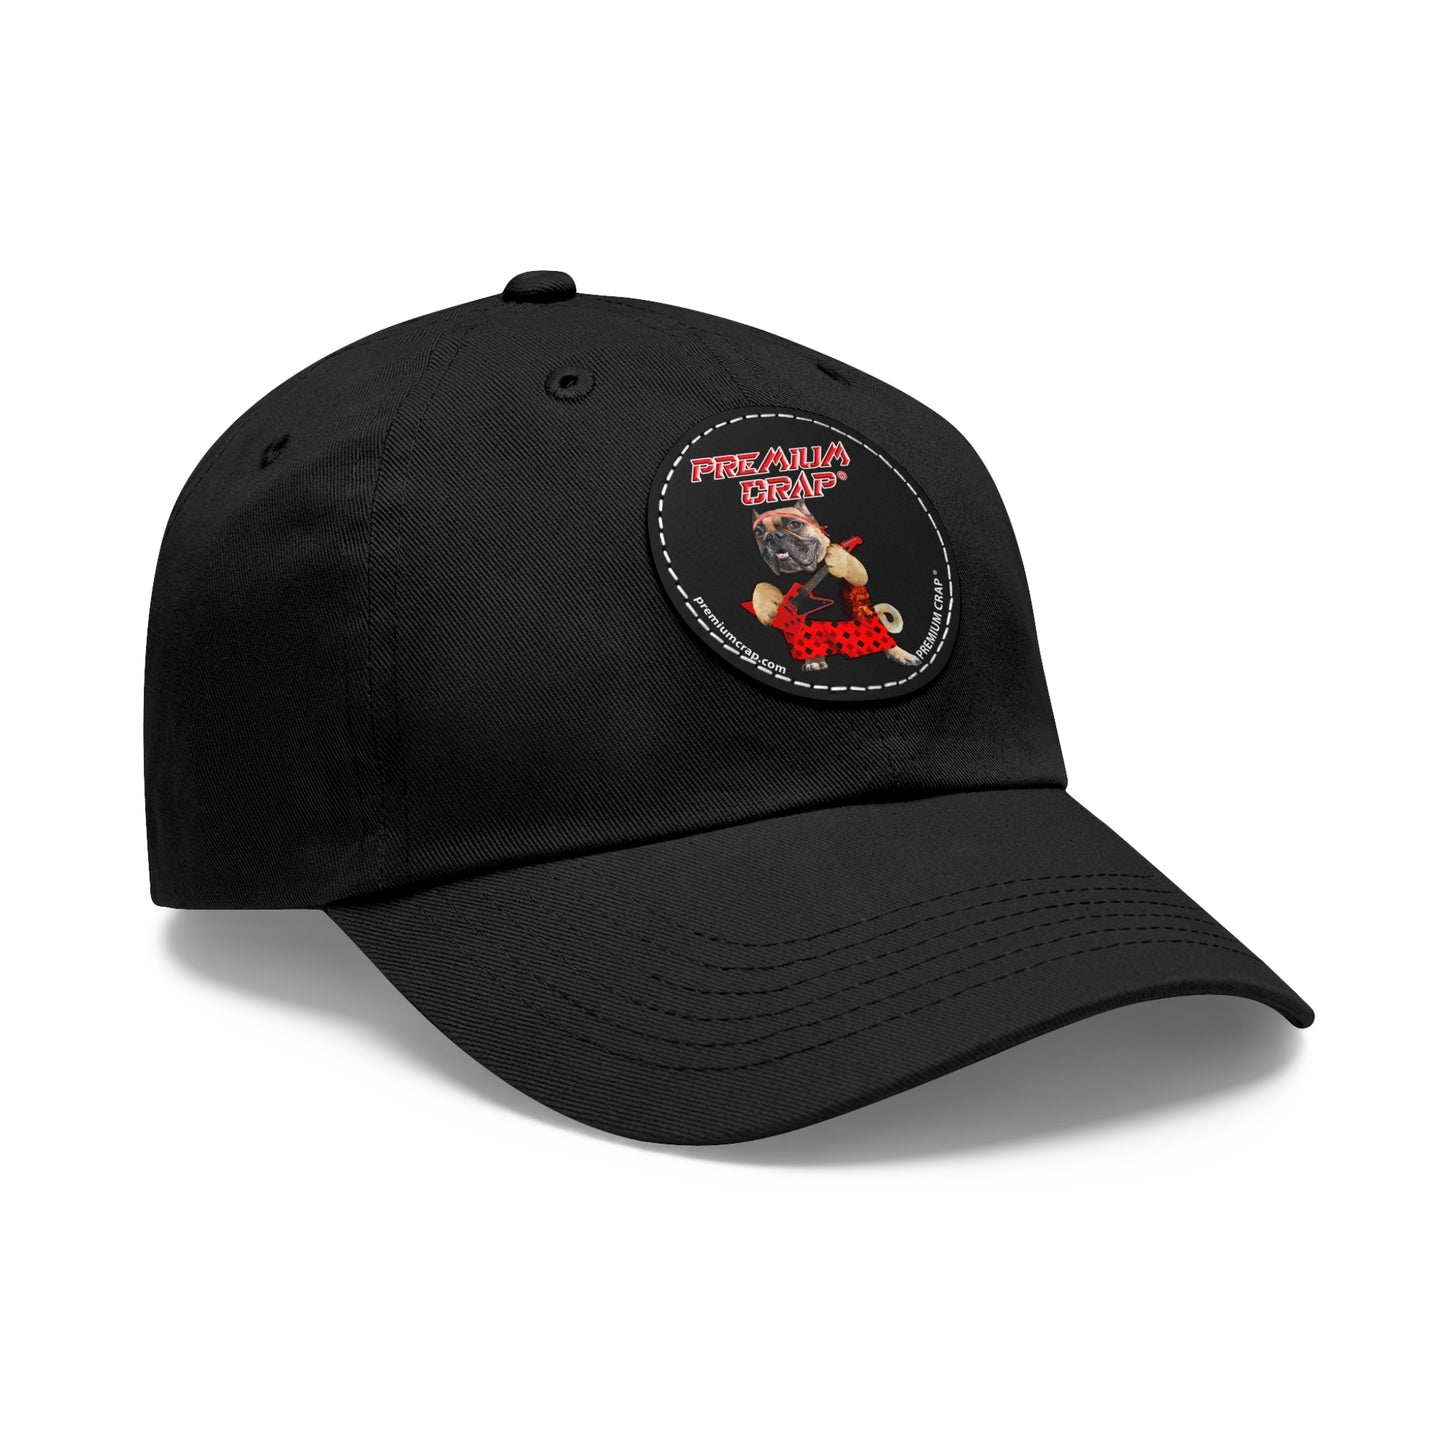 Premium Crap II Dad Hat with Leather Patch (Round)